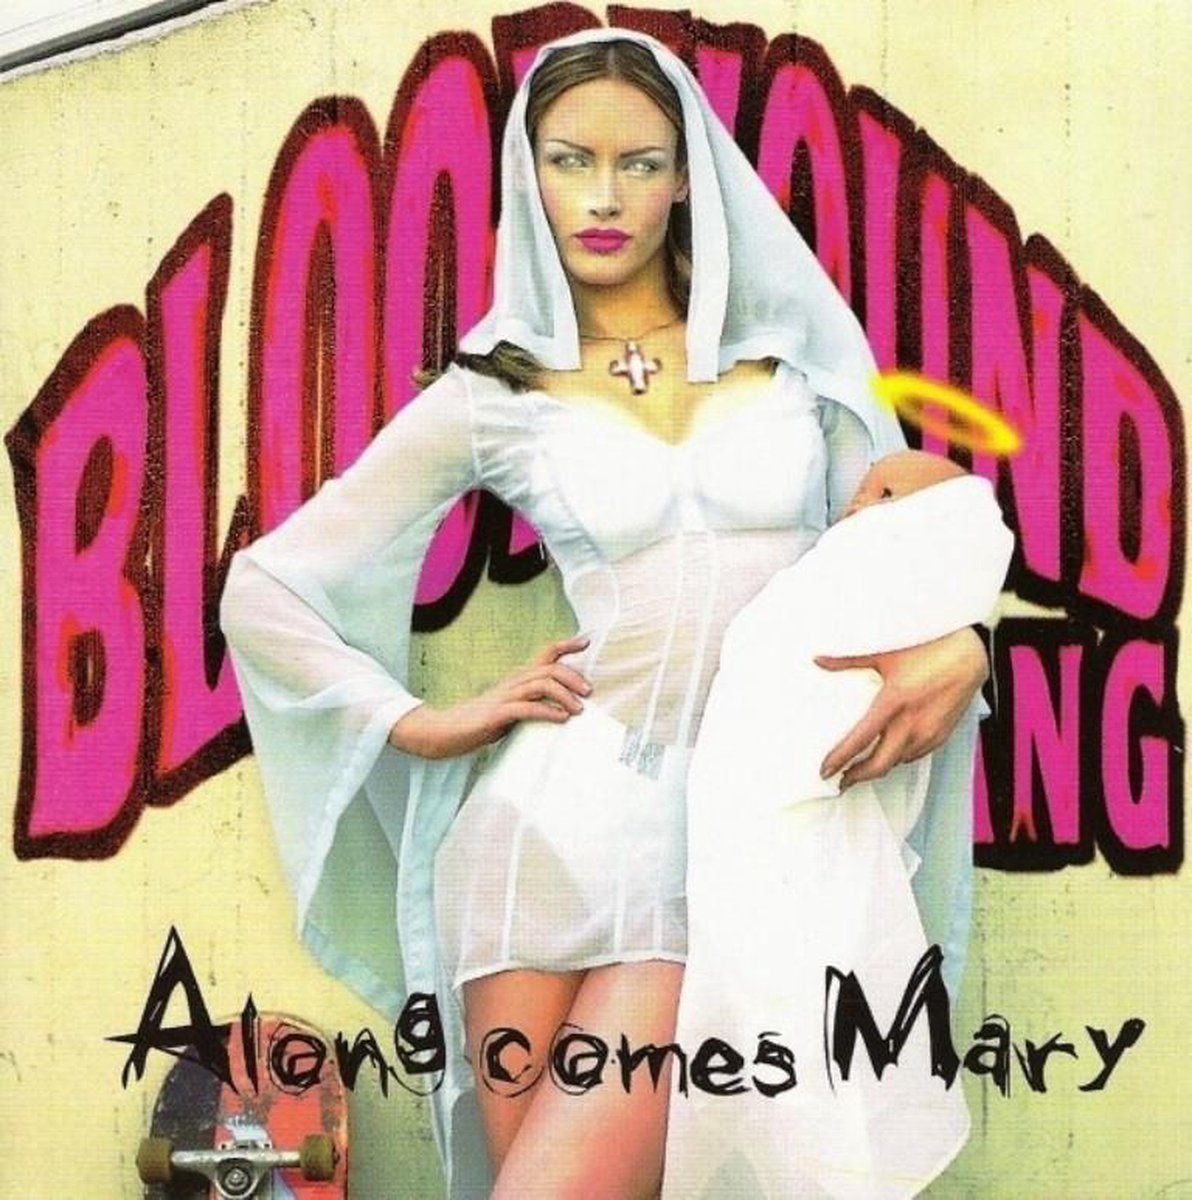 Along Comes Mary - The Bloodhound Gang